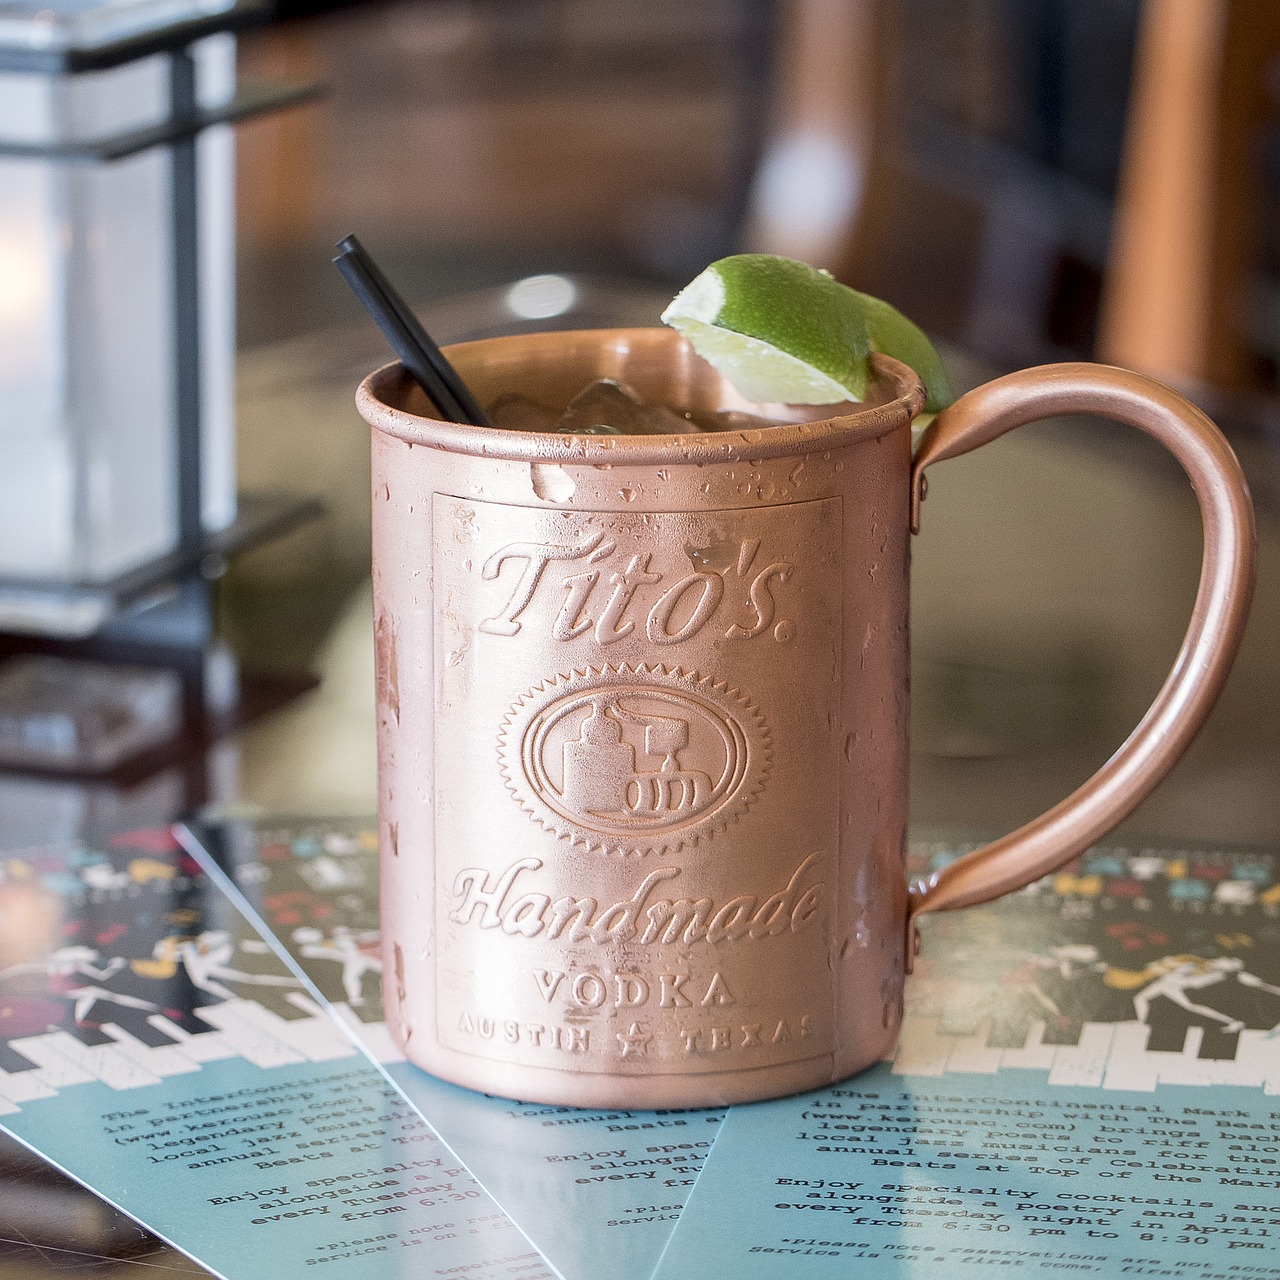 moscow  mule  vodka free photo